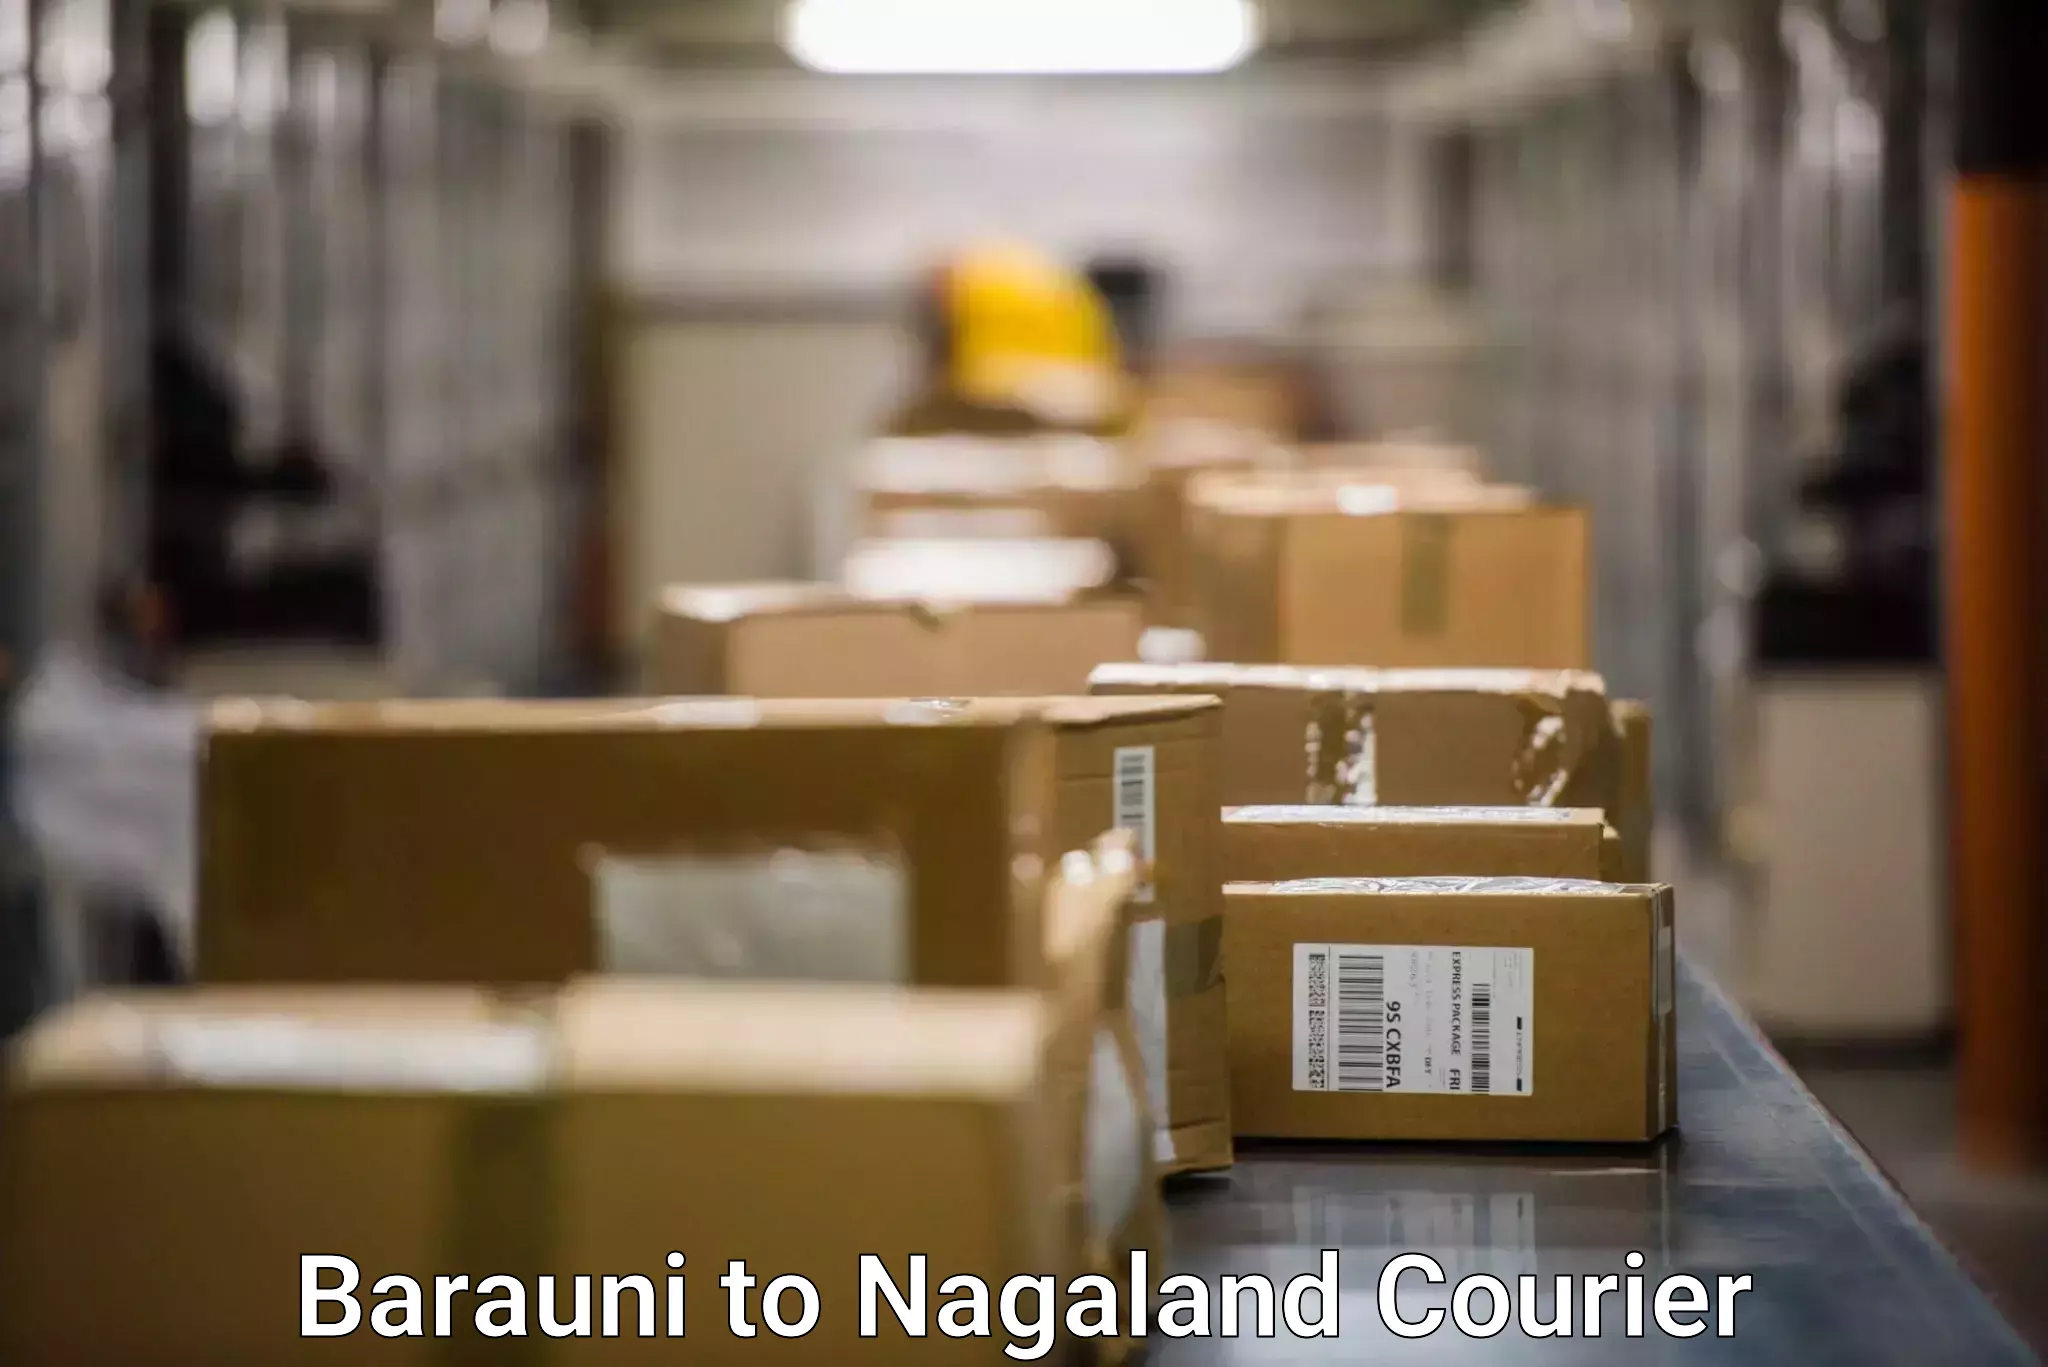 Advanced delivery network Barauni to Nagaland